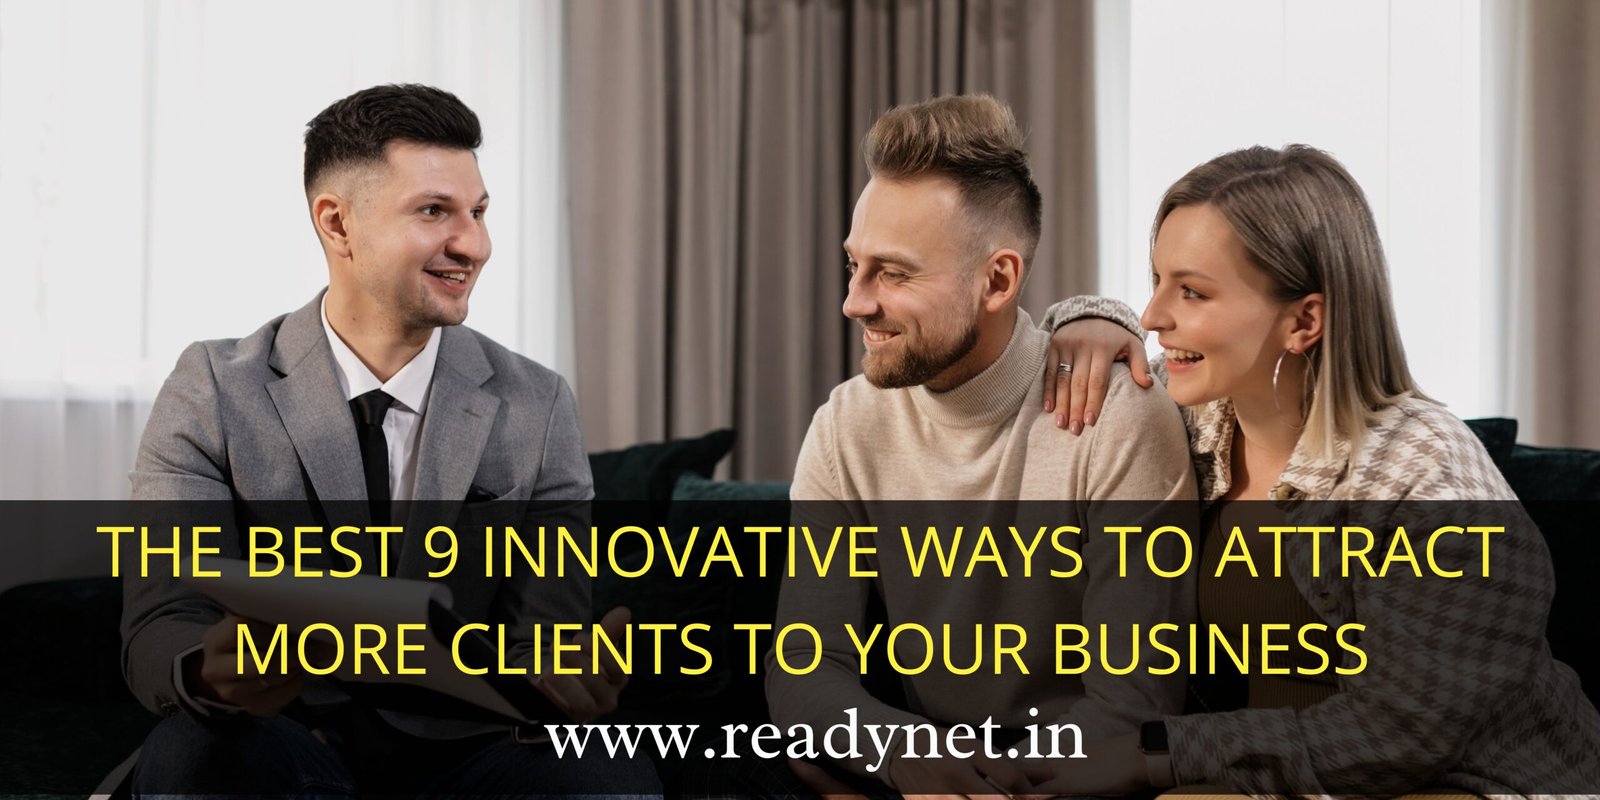 The best 9 innovative ways to attract more clients to your business